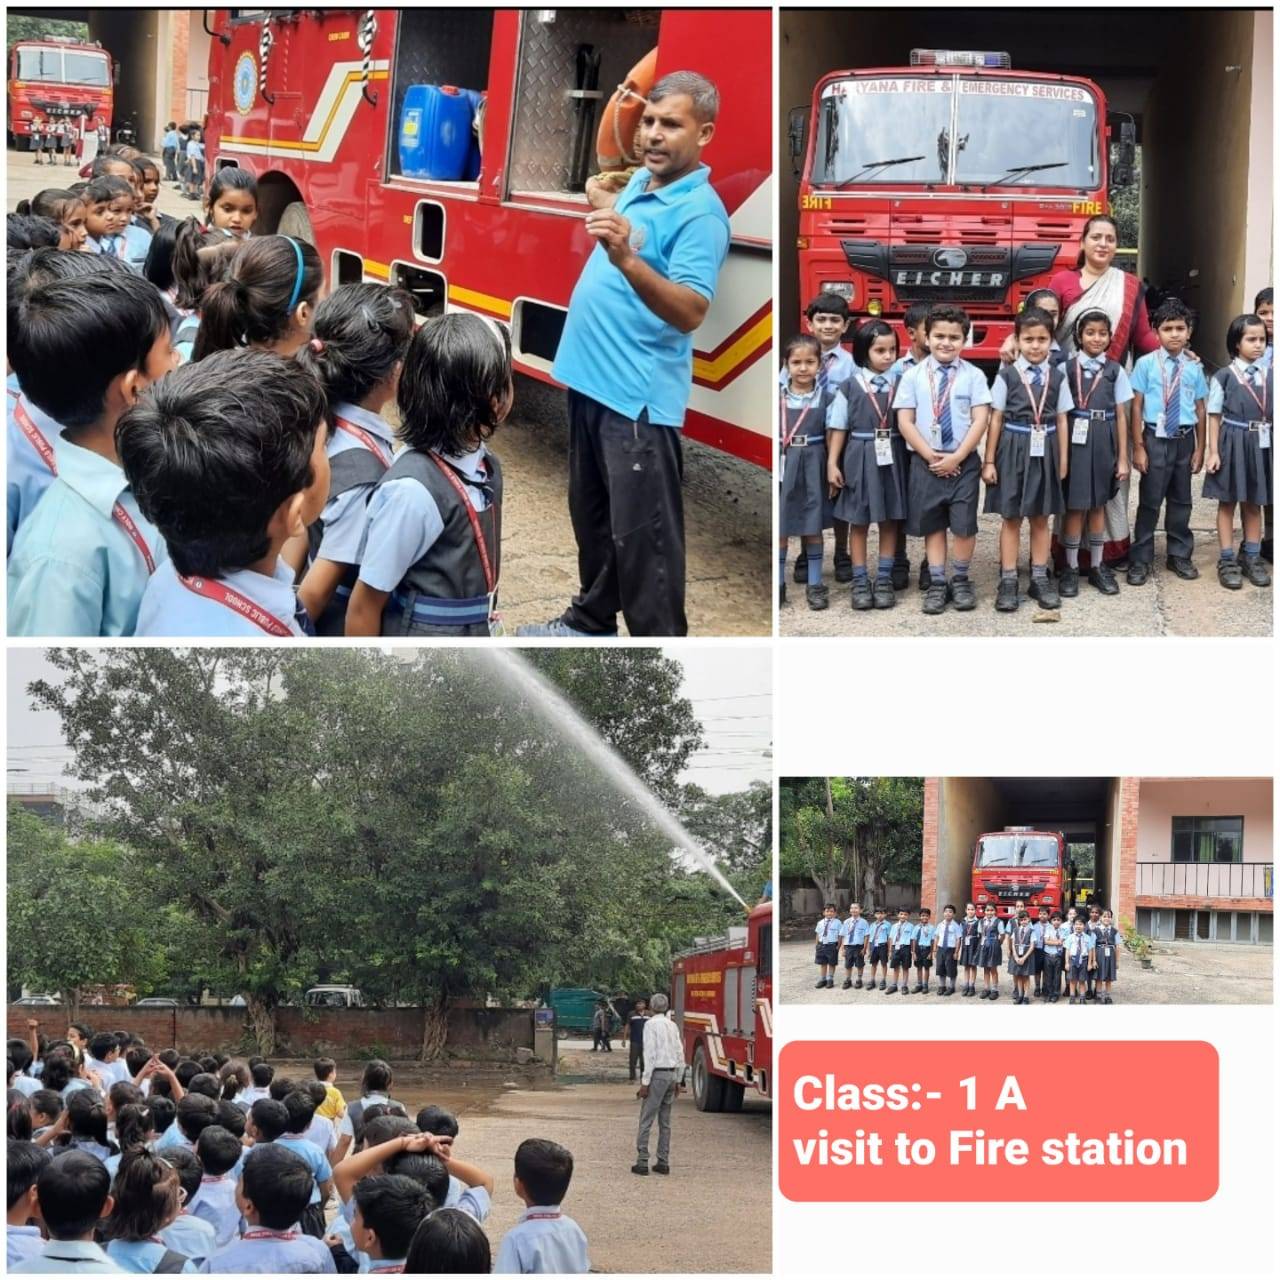 A VISIT TO THE FIRE STATION